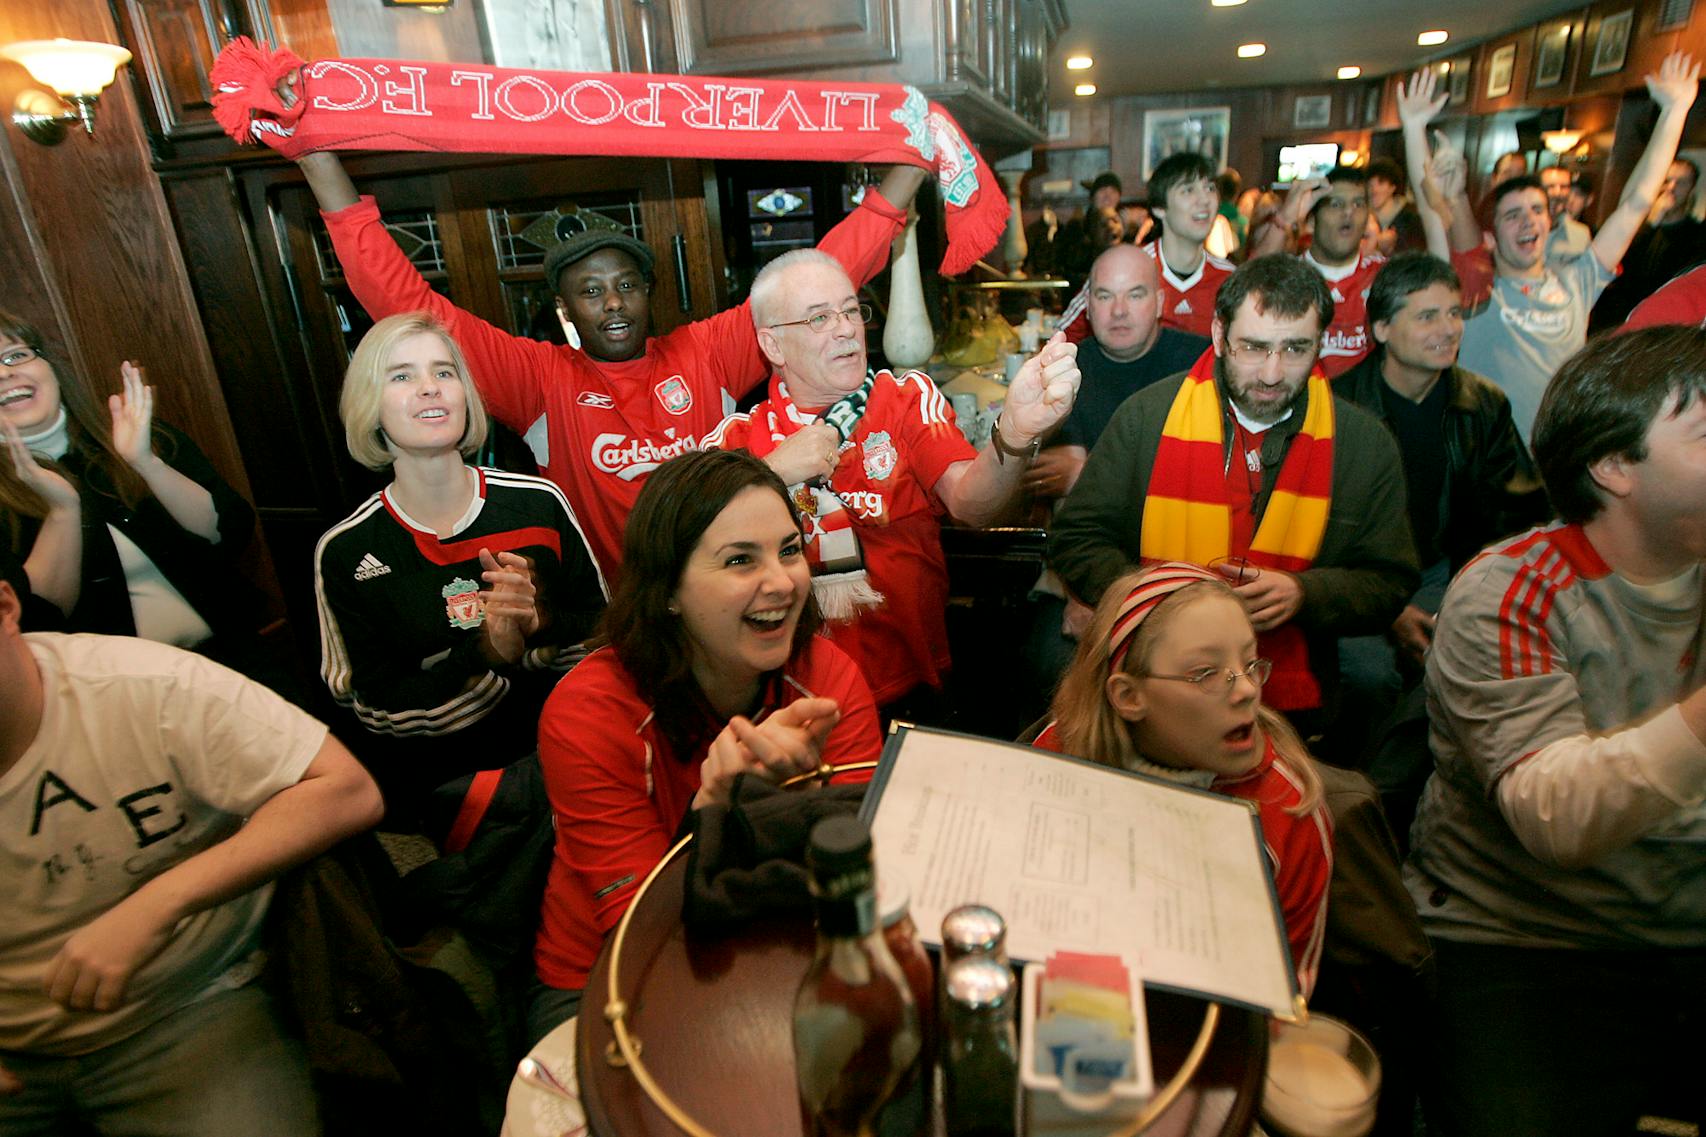 ELIZABETH FLORES• eflores@startribune.com March 14, 2009 - Minneapolis, MN - Soccer fans cheered a 7:30 am live soccer broadcast between Liverpool and Manchester United at Britt’s Pub in downtown Minneapolis.